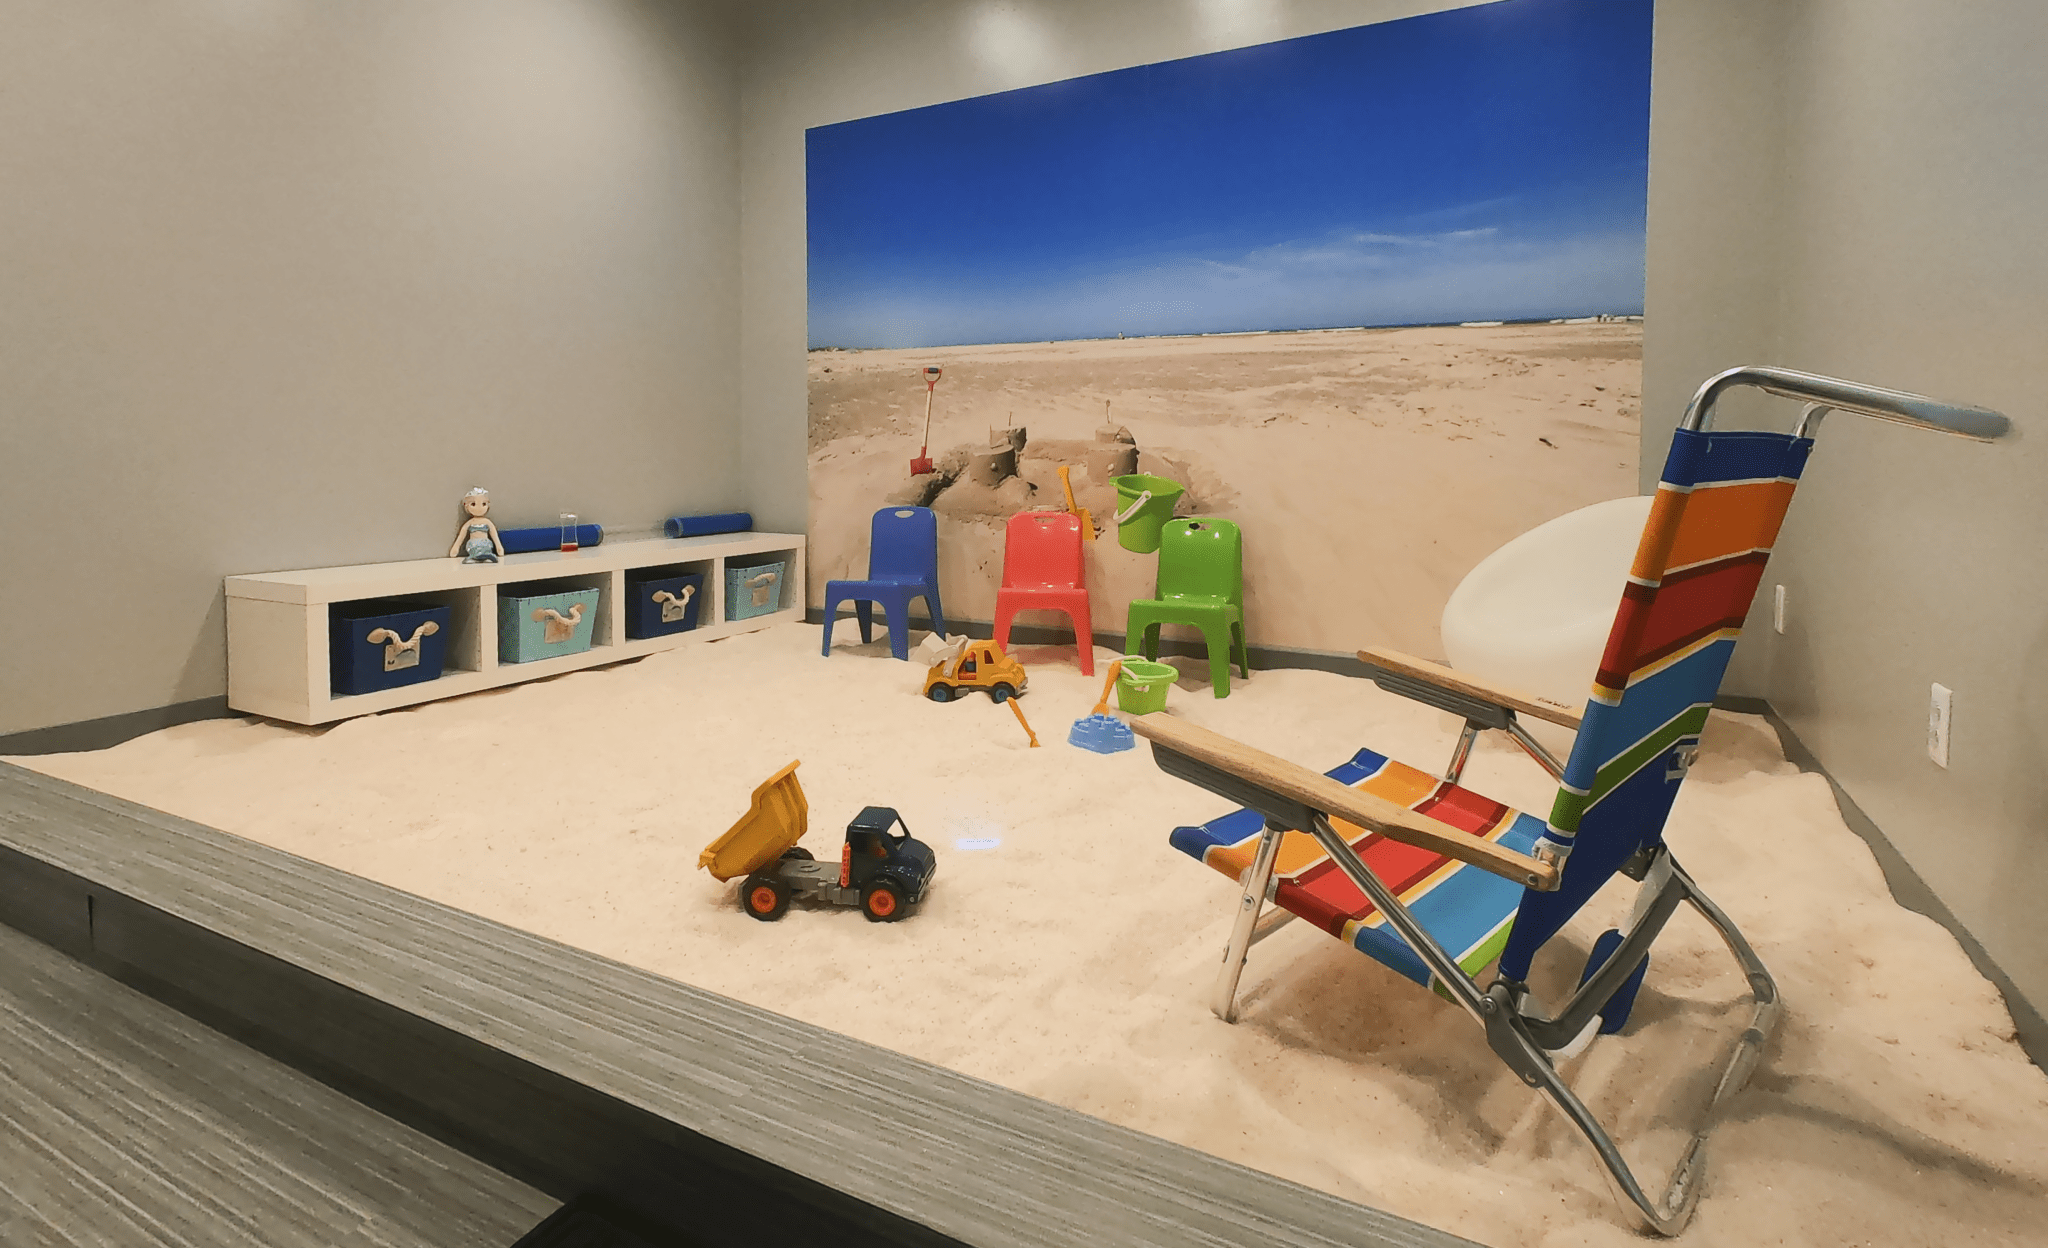 Kids Can Play With Toys At Breathe Salt And Sauna Children'S Salt Room.